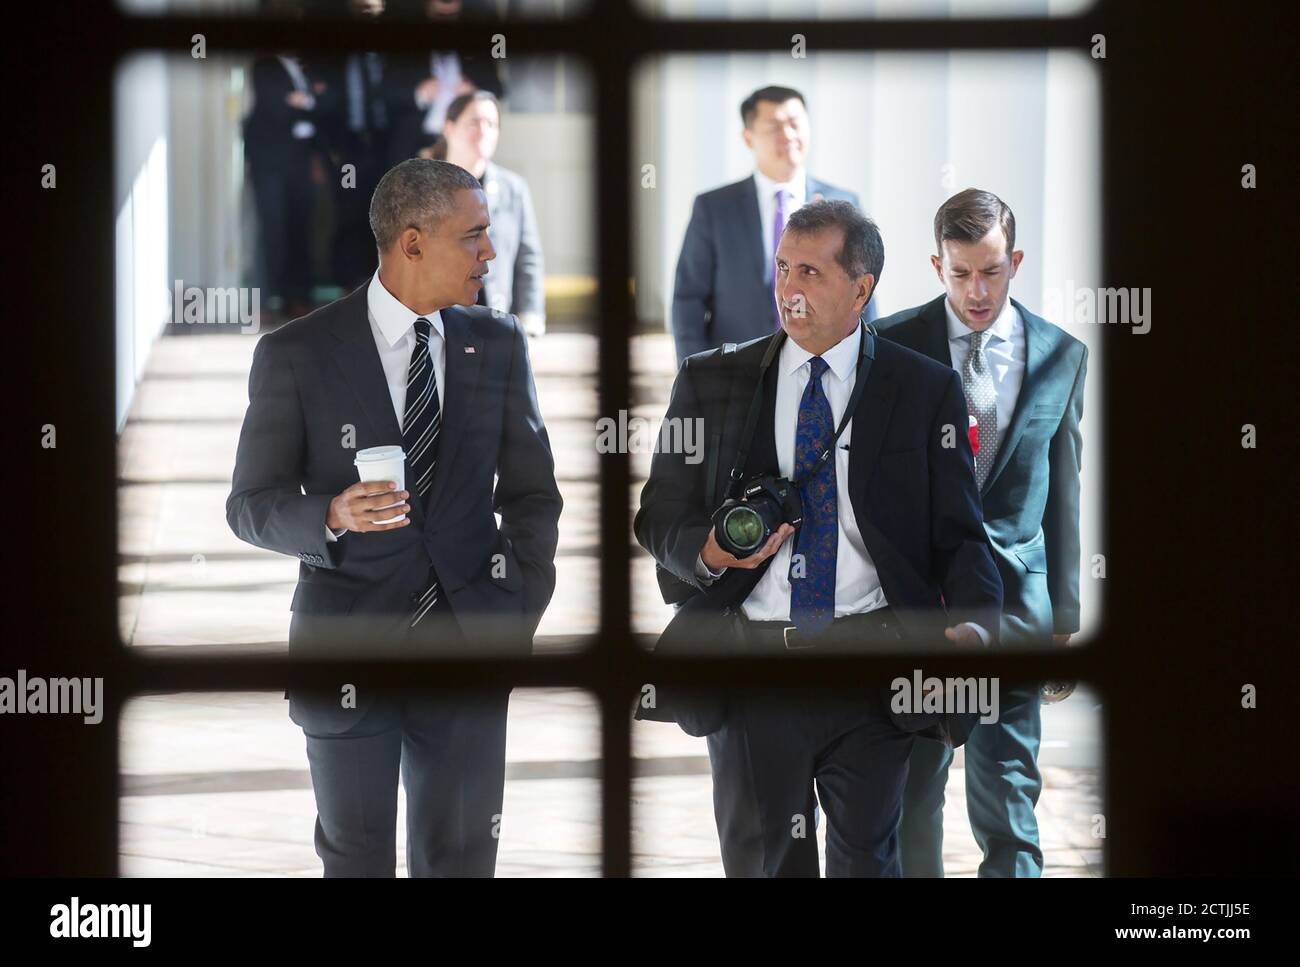 RELEASE DATE: September 18, 2020 TITLE: The Way I See It STUDIO: Focus Features DIRECTOR: Dawn Porter PLOT: Former Chief Official White House Photographer Pete Souza's journey as a person with top secret clearance and total access to the President. STARRING: President Barack Obama walks along the West Colonnade of the White House with Chief White House Photographer Pete Souza. (Credit Image: © Focus Features/Entertainment Pictures) Stock Photo